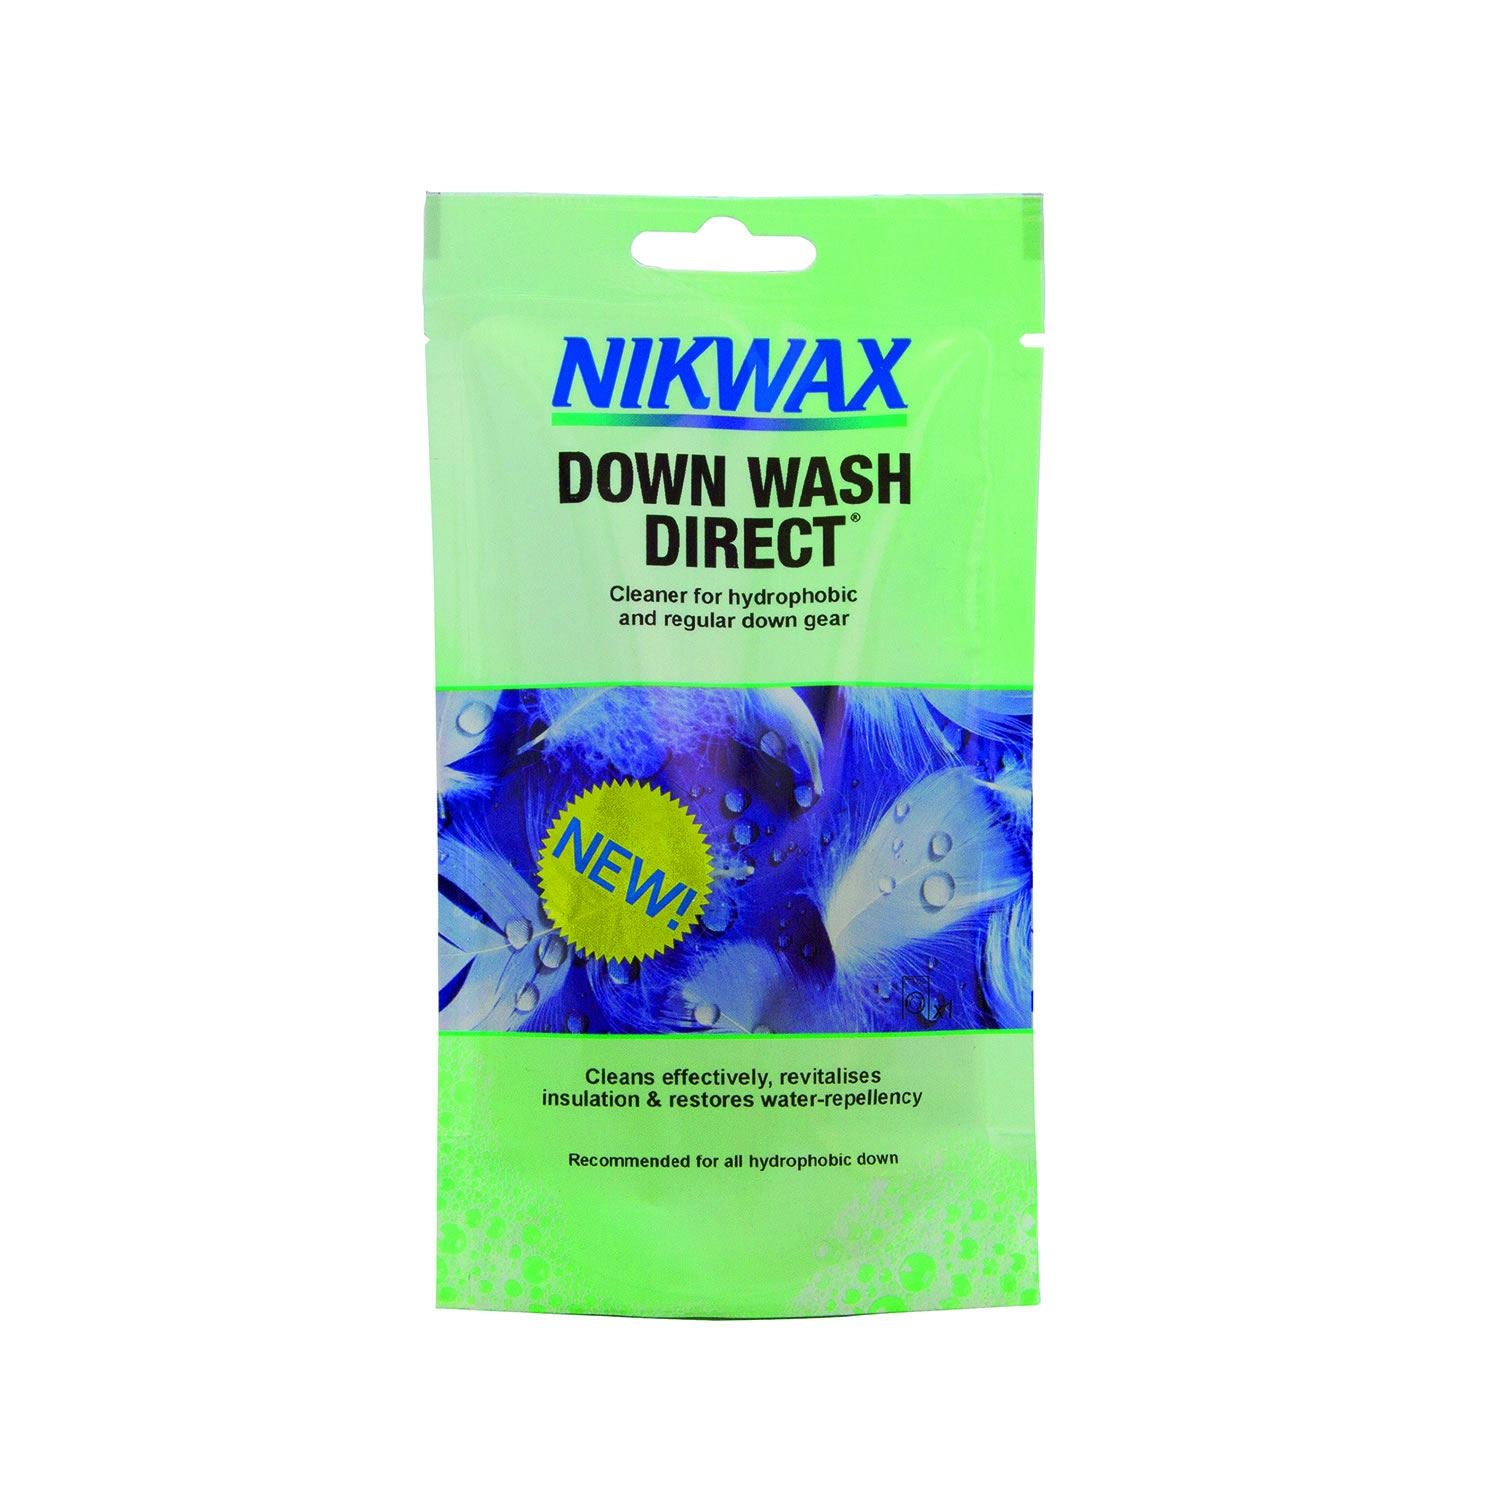 Nikwax Down Wash Direct - Just Horse Riders